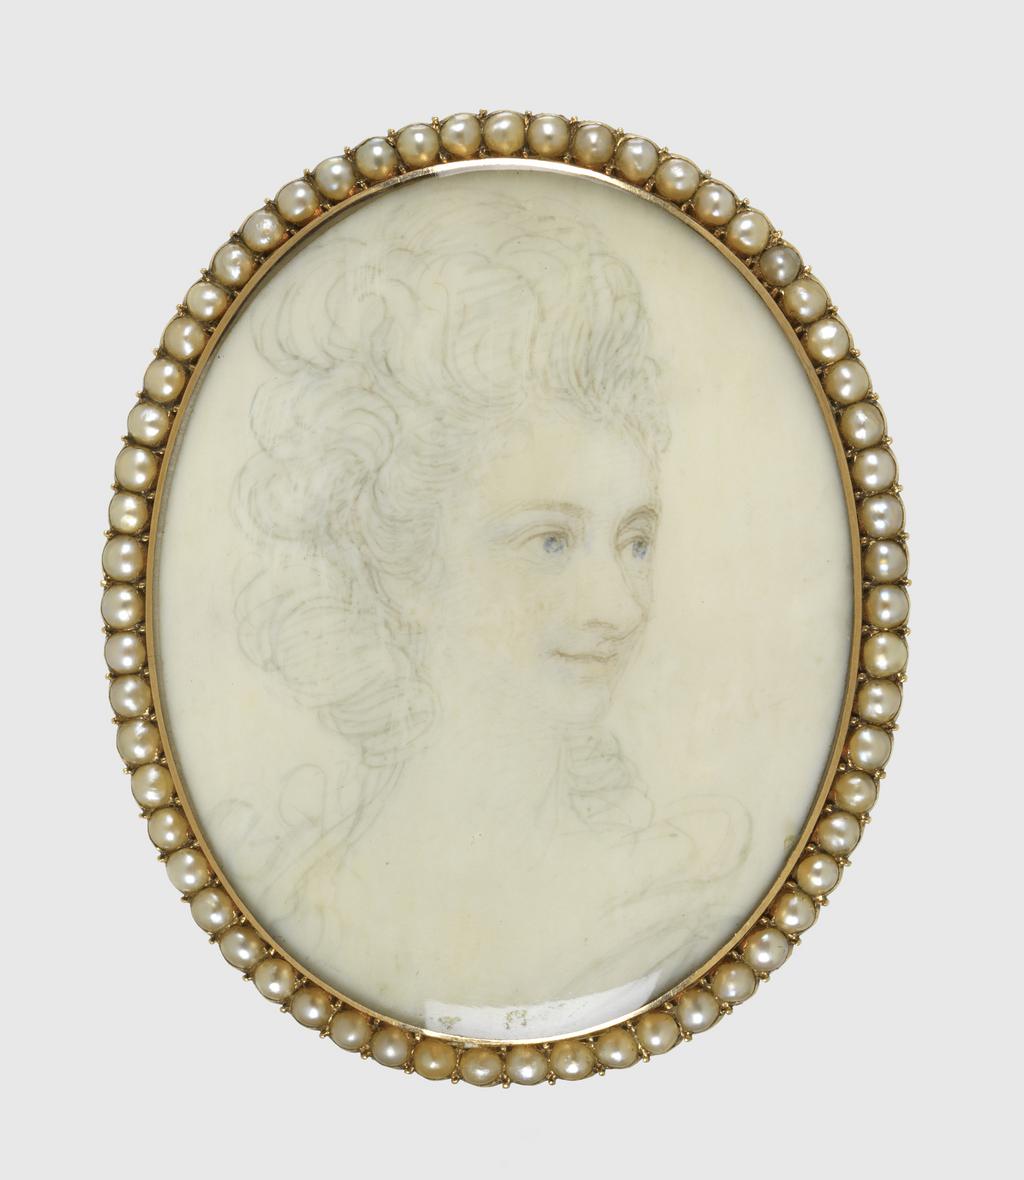 An image of Georgiana, Duchess of Devonshire. Richard Cosway. Watercolour on ivory, height 47 mm, width 38 mm. 18th Century.